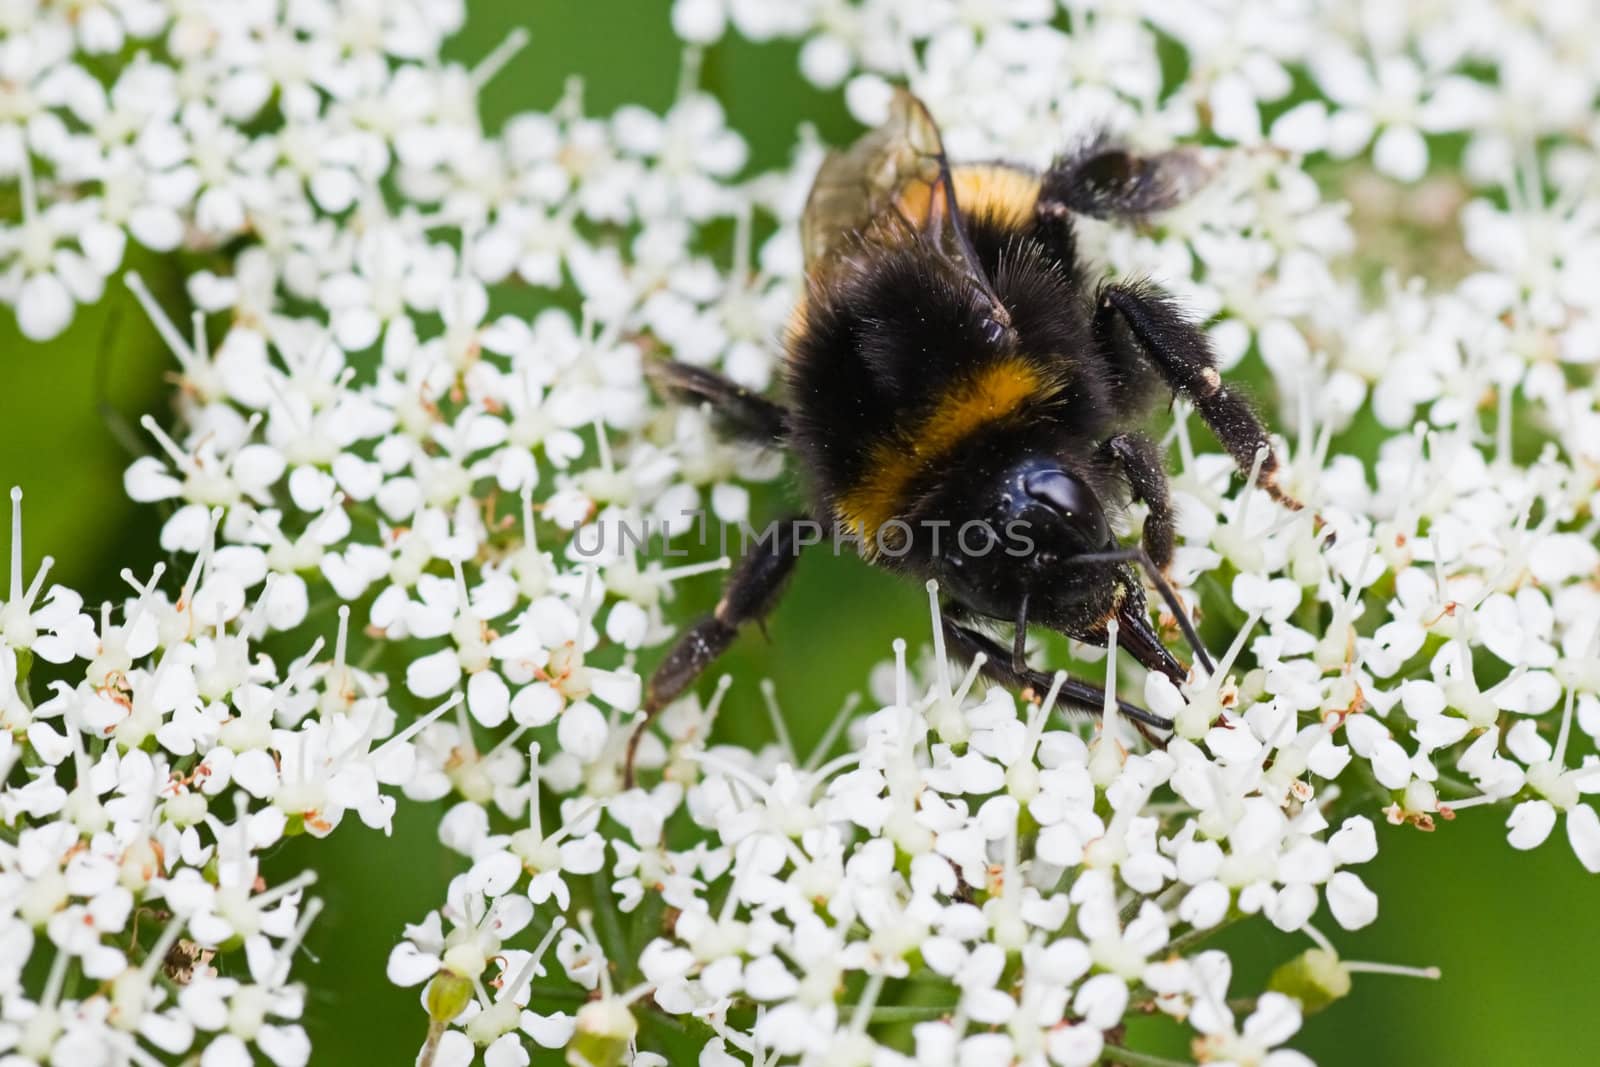 Little Bumble bee busy gathering nectar in summer by Colette